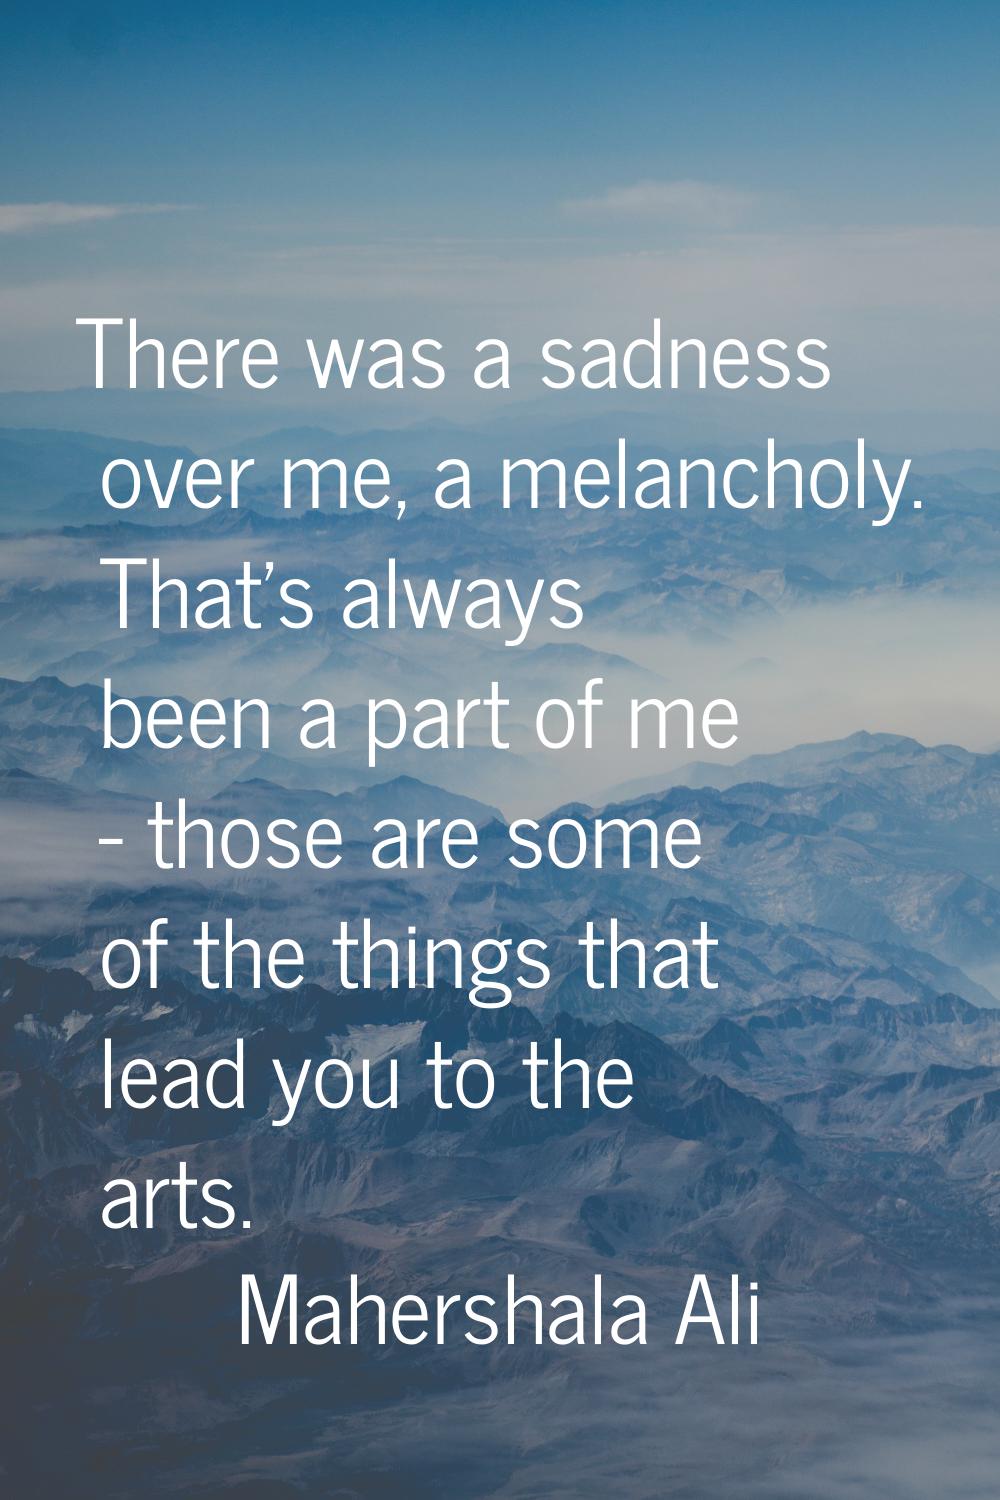 There was a sadness over me, a melancholy. That's always been a part of me - those are some of the 